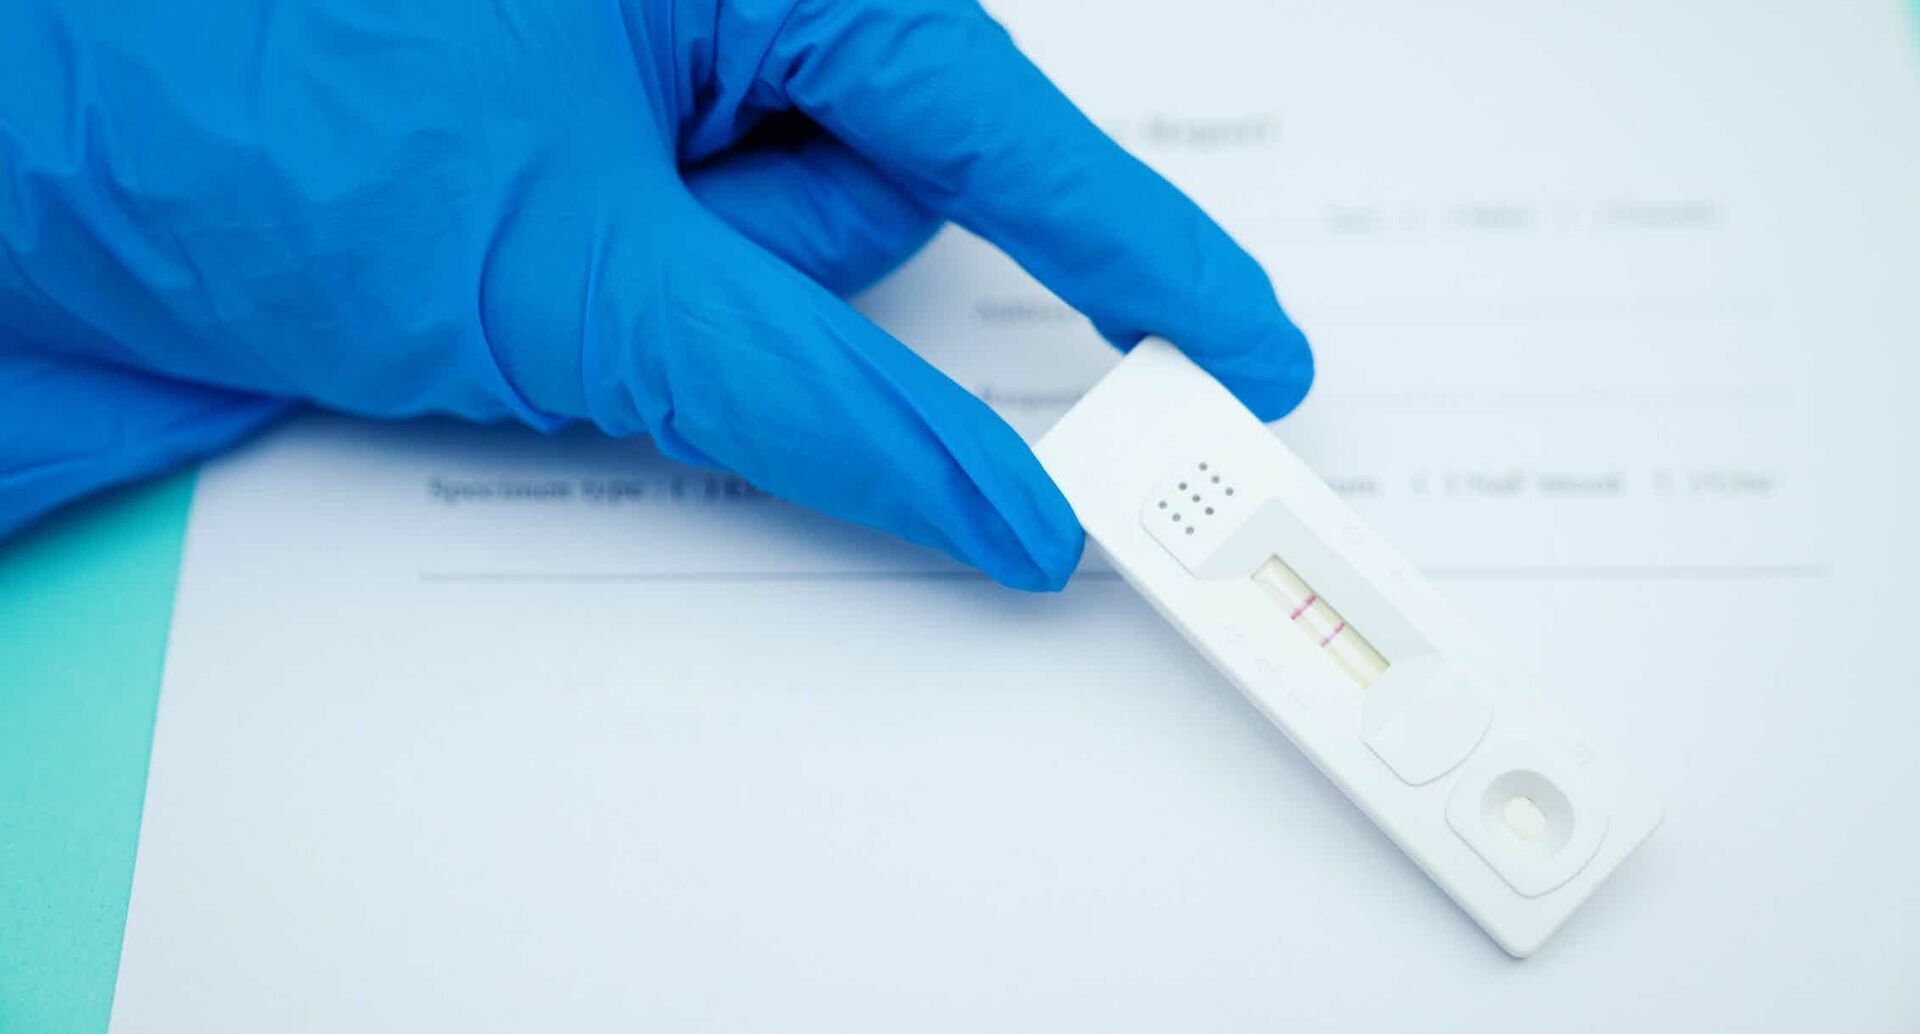 Buy, check and walk! Antigen tests are becoming more popular in Europe